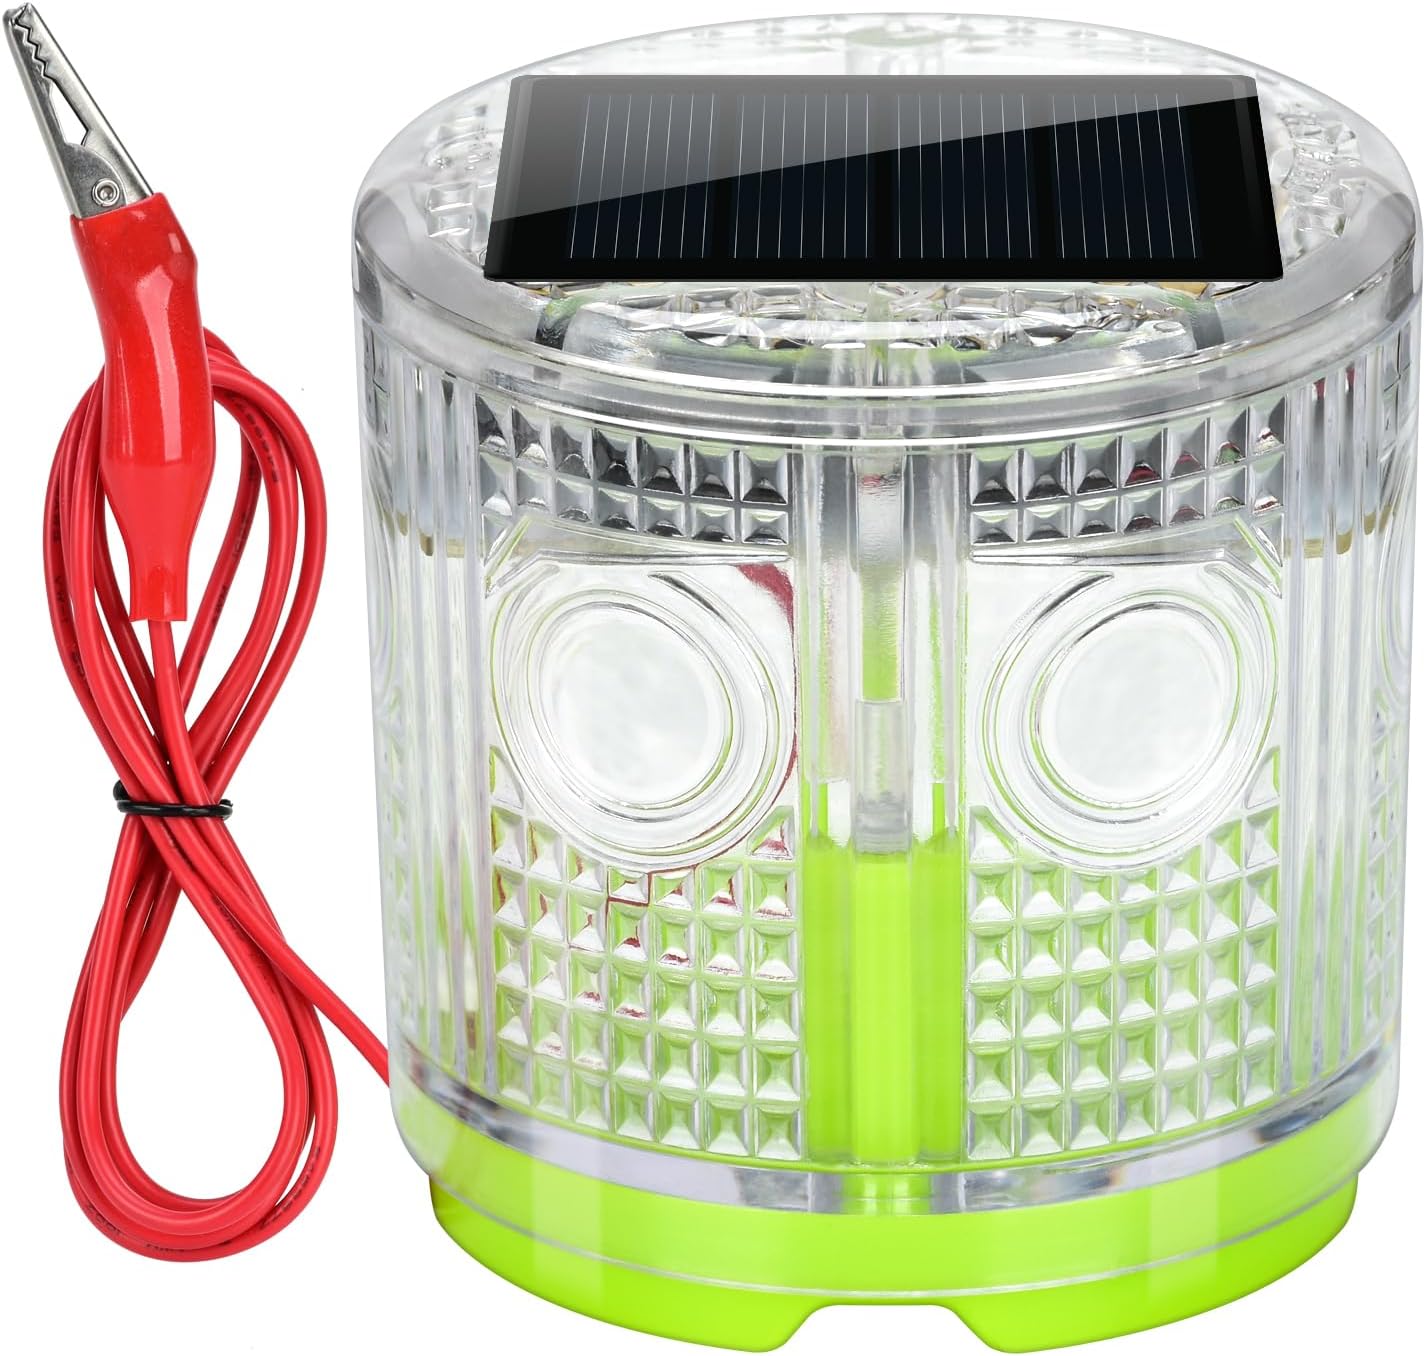 Electric Fence Indicator Light, Briidea Solar Fence Alarm with Light Transmission to 1/2 Mile, Ensure The Normal Operation of The Electronic Fence to Prevent The Invasion of Wild Animals